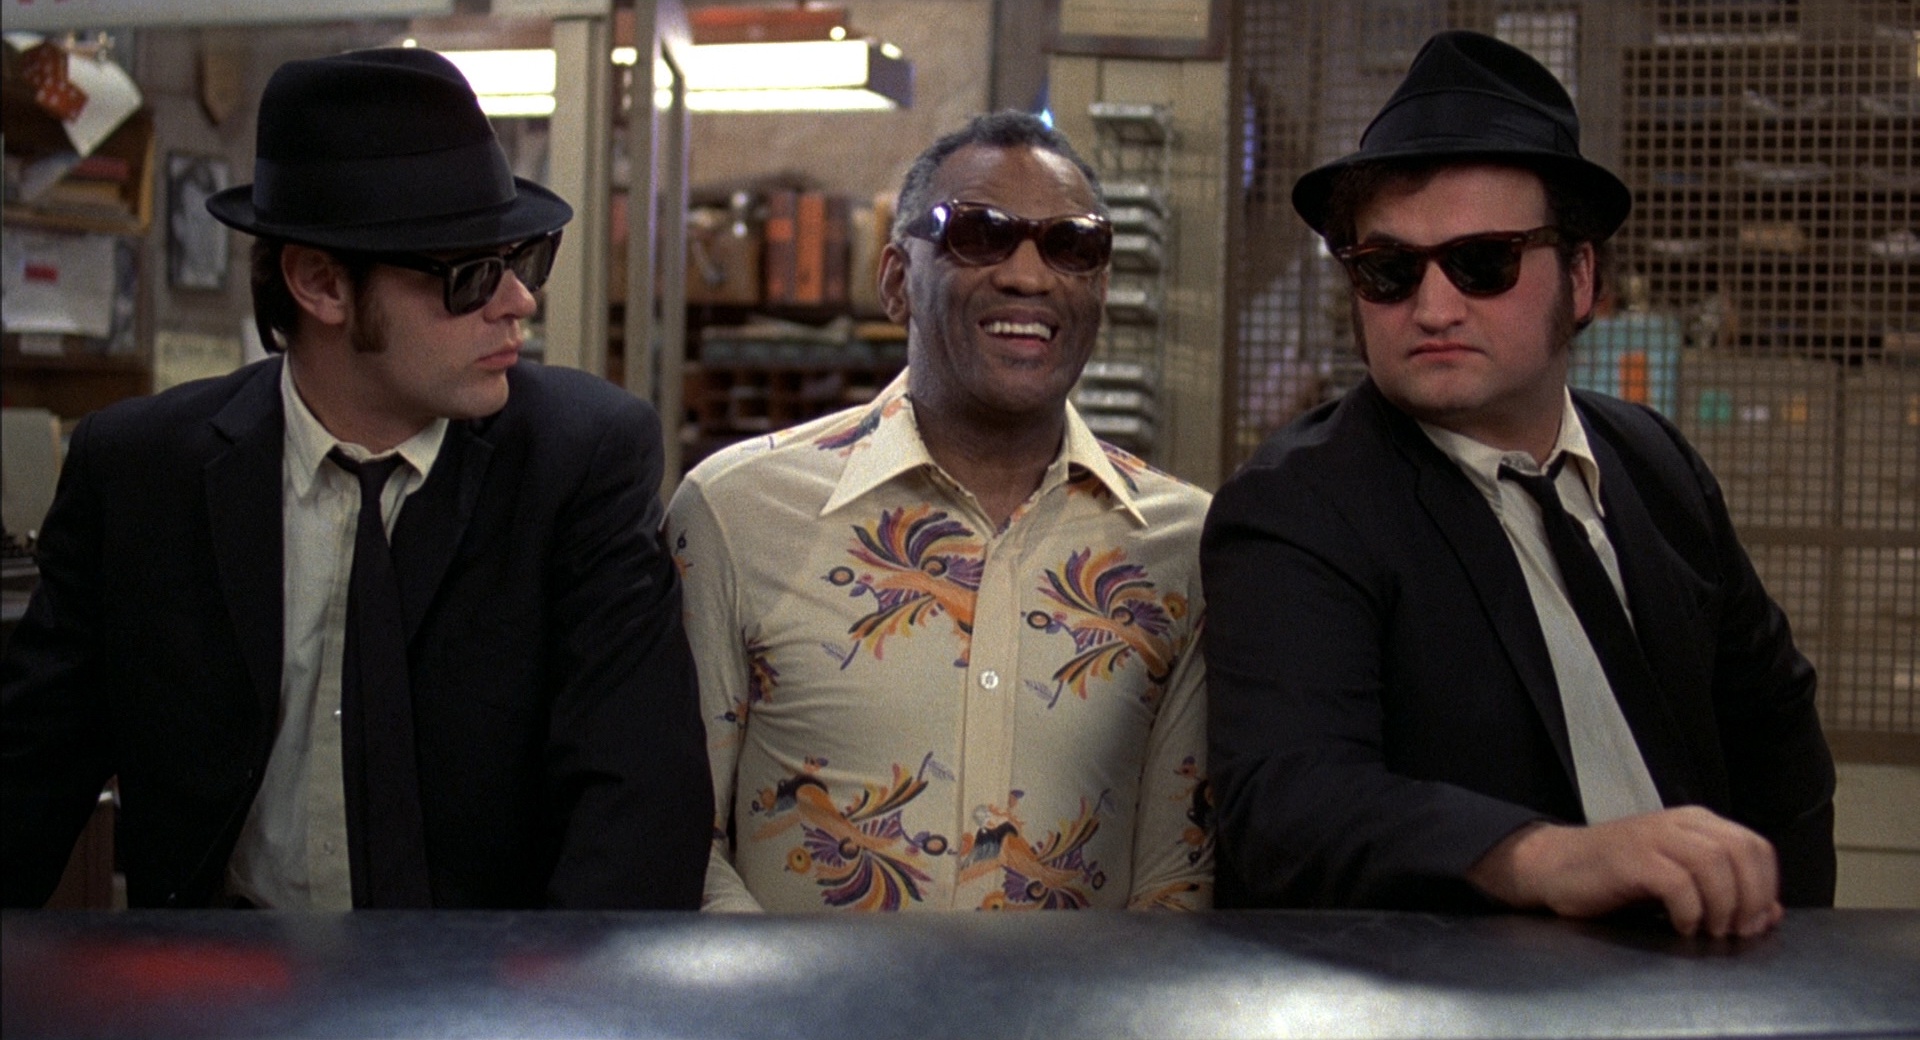 https://musicboxtheatre.com/sites/default/files/the-blues-brothers-film.jpg